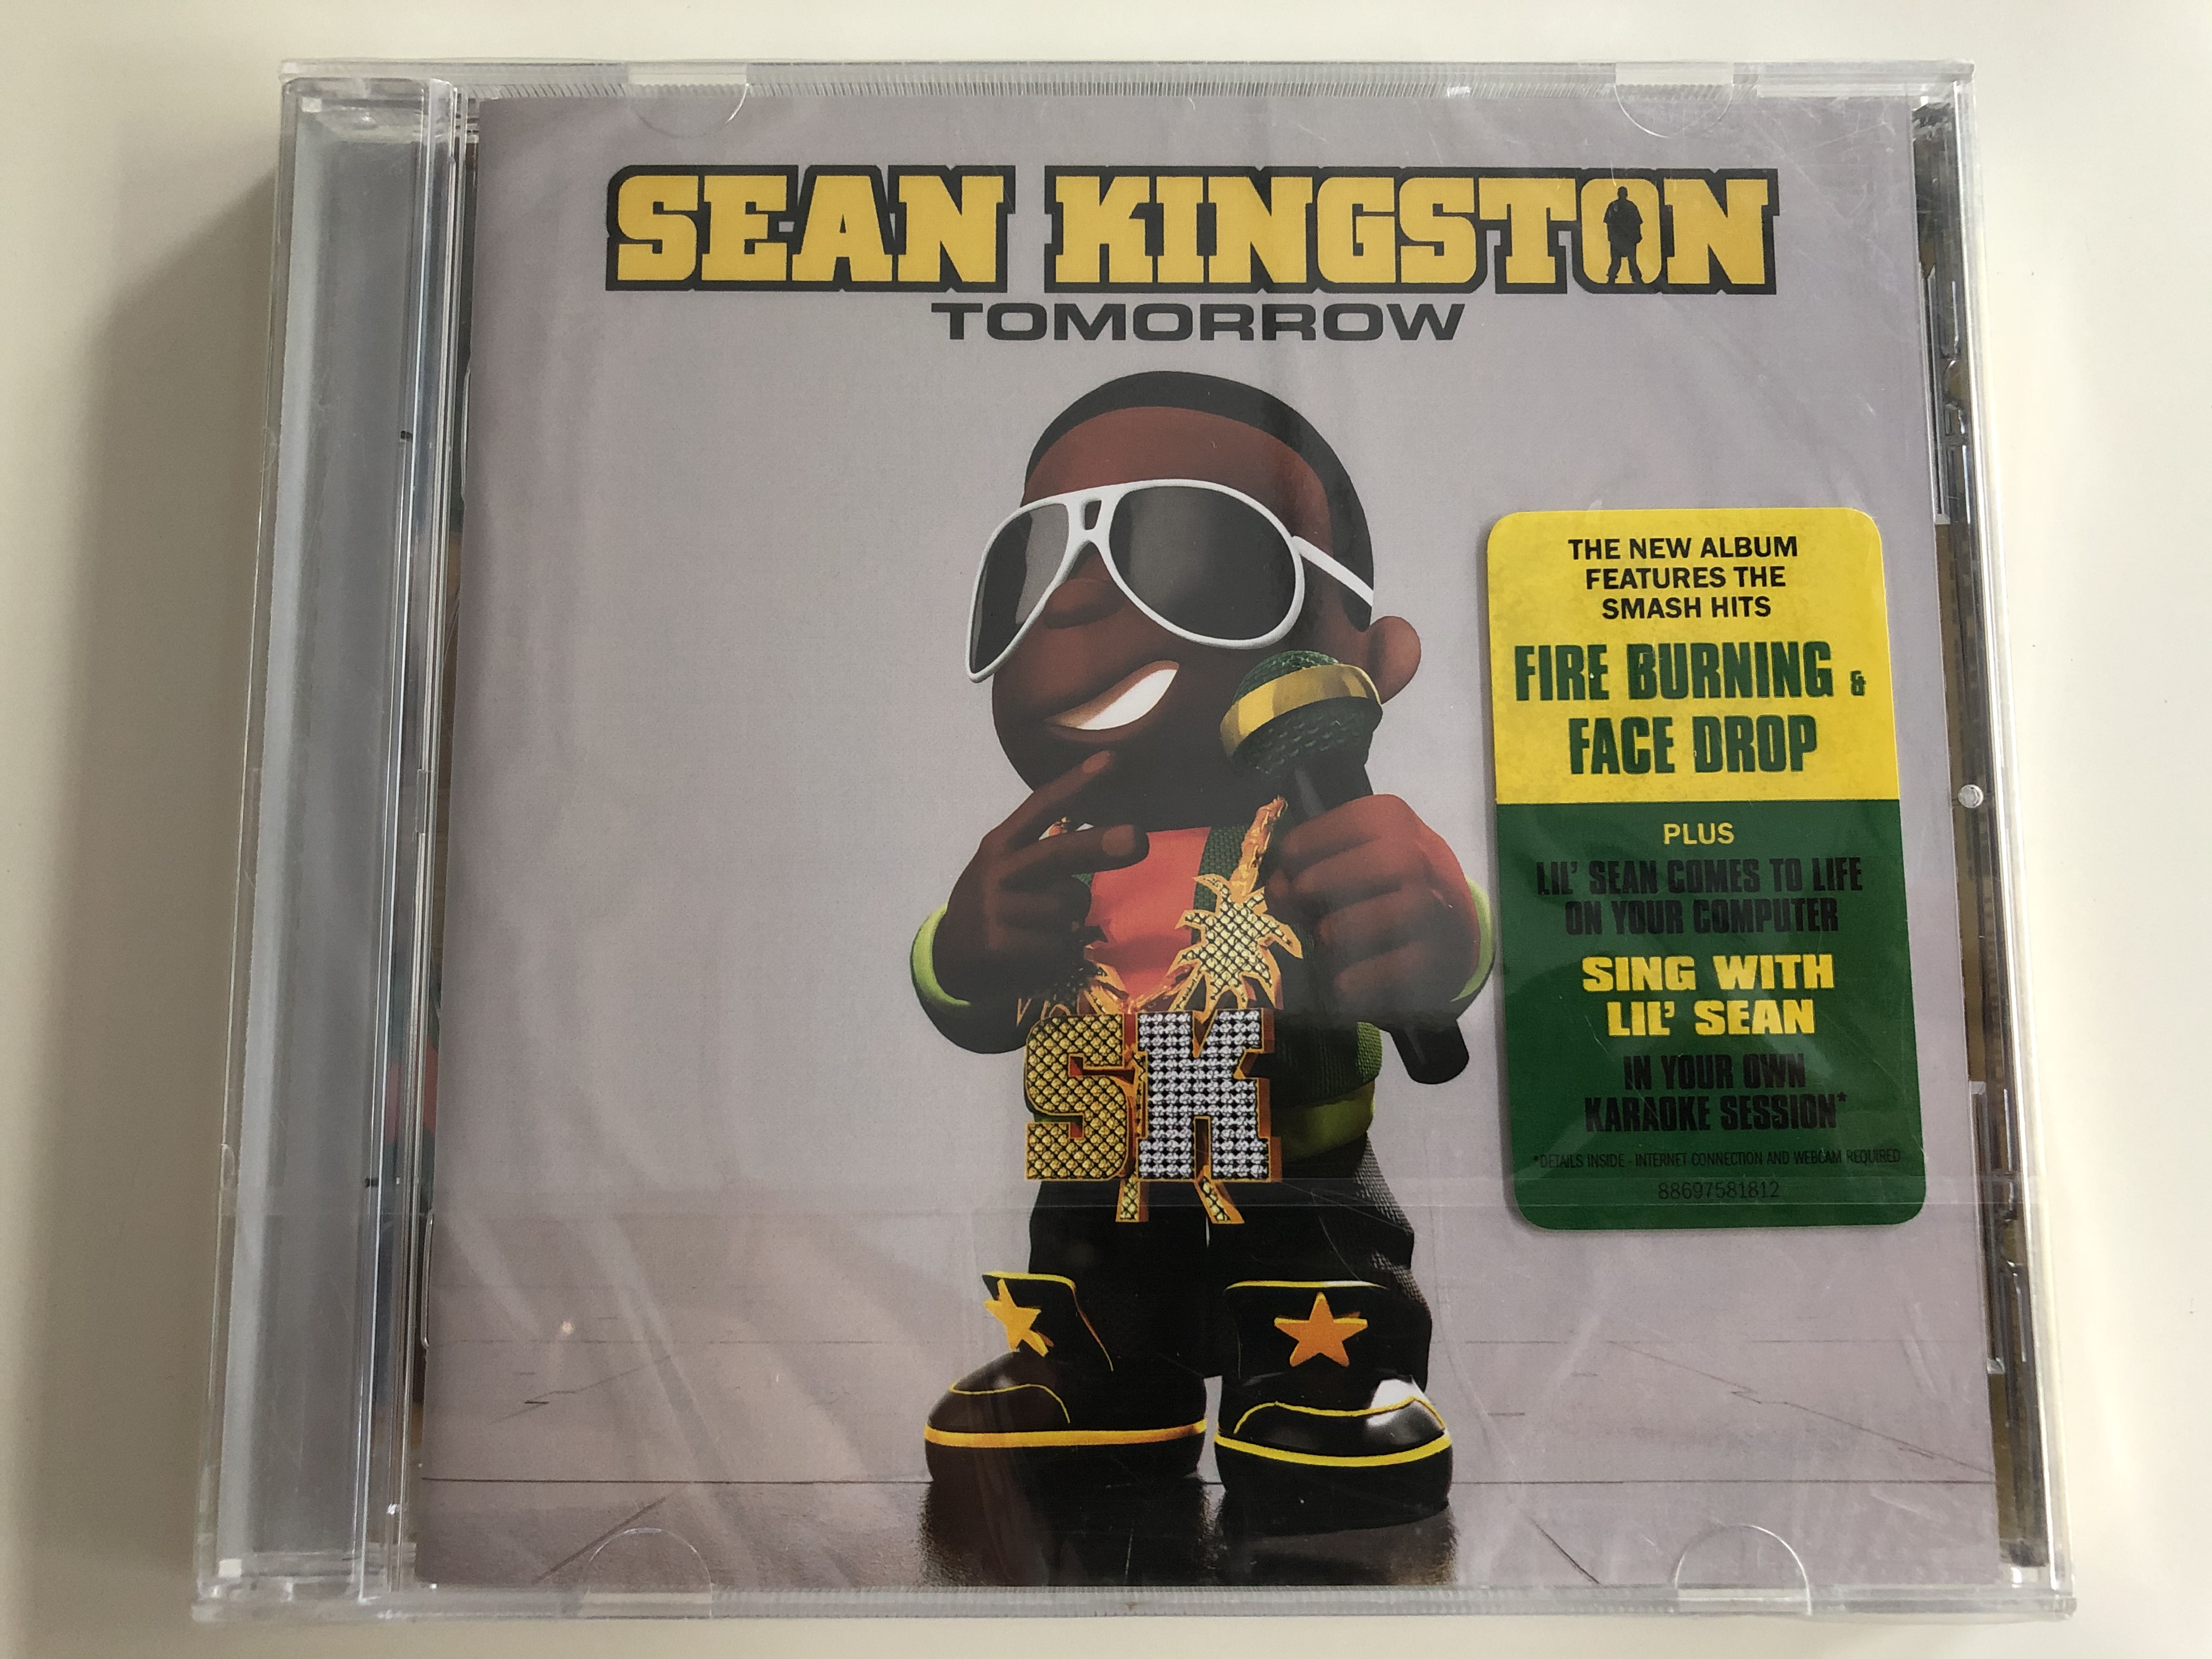 sean-kingston-tomorrow-the-new-album-features-the-smash-hits-fire-burning-face-drop-plus-lil-sean-comes-to-life-on-your-computer.-sing-with-lil-sean-in-your-own-karaoke-session-epic-au-1-.jpg